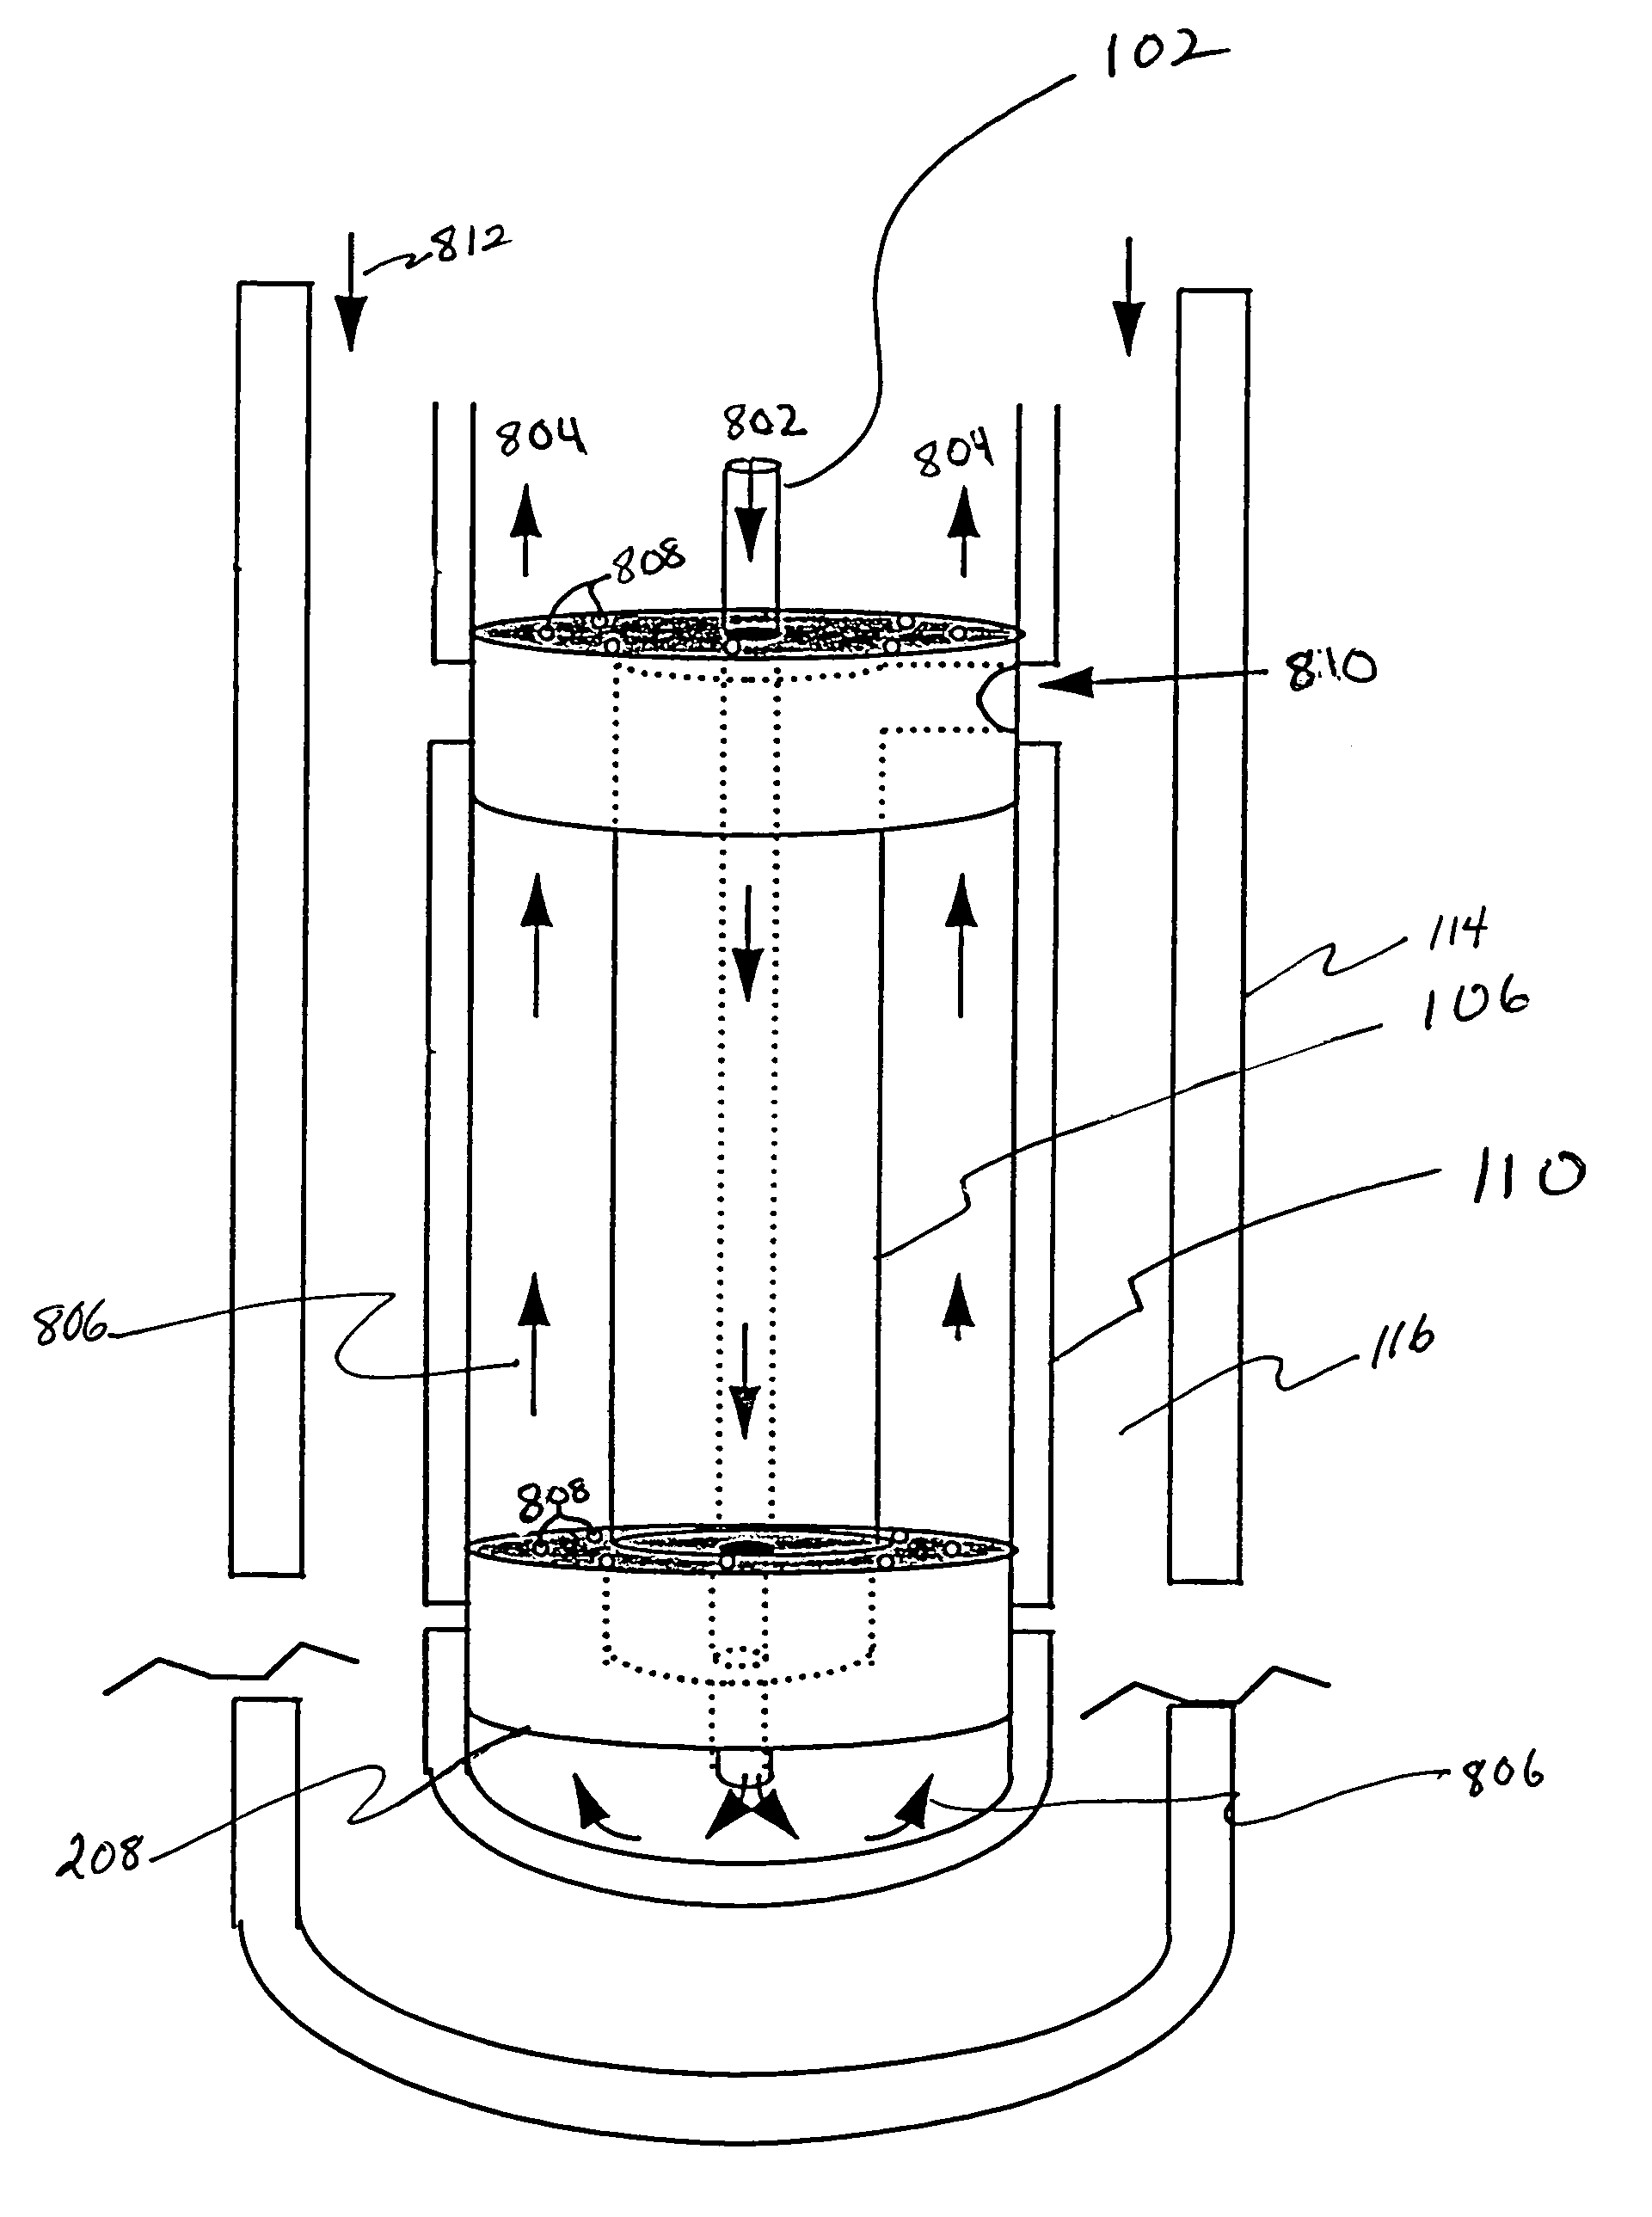 Bioreactor design and process for engineering tissue from cells